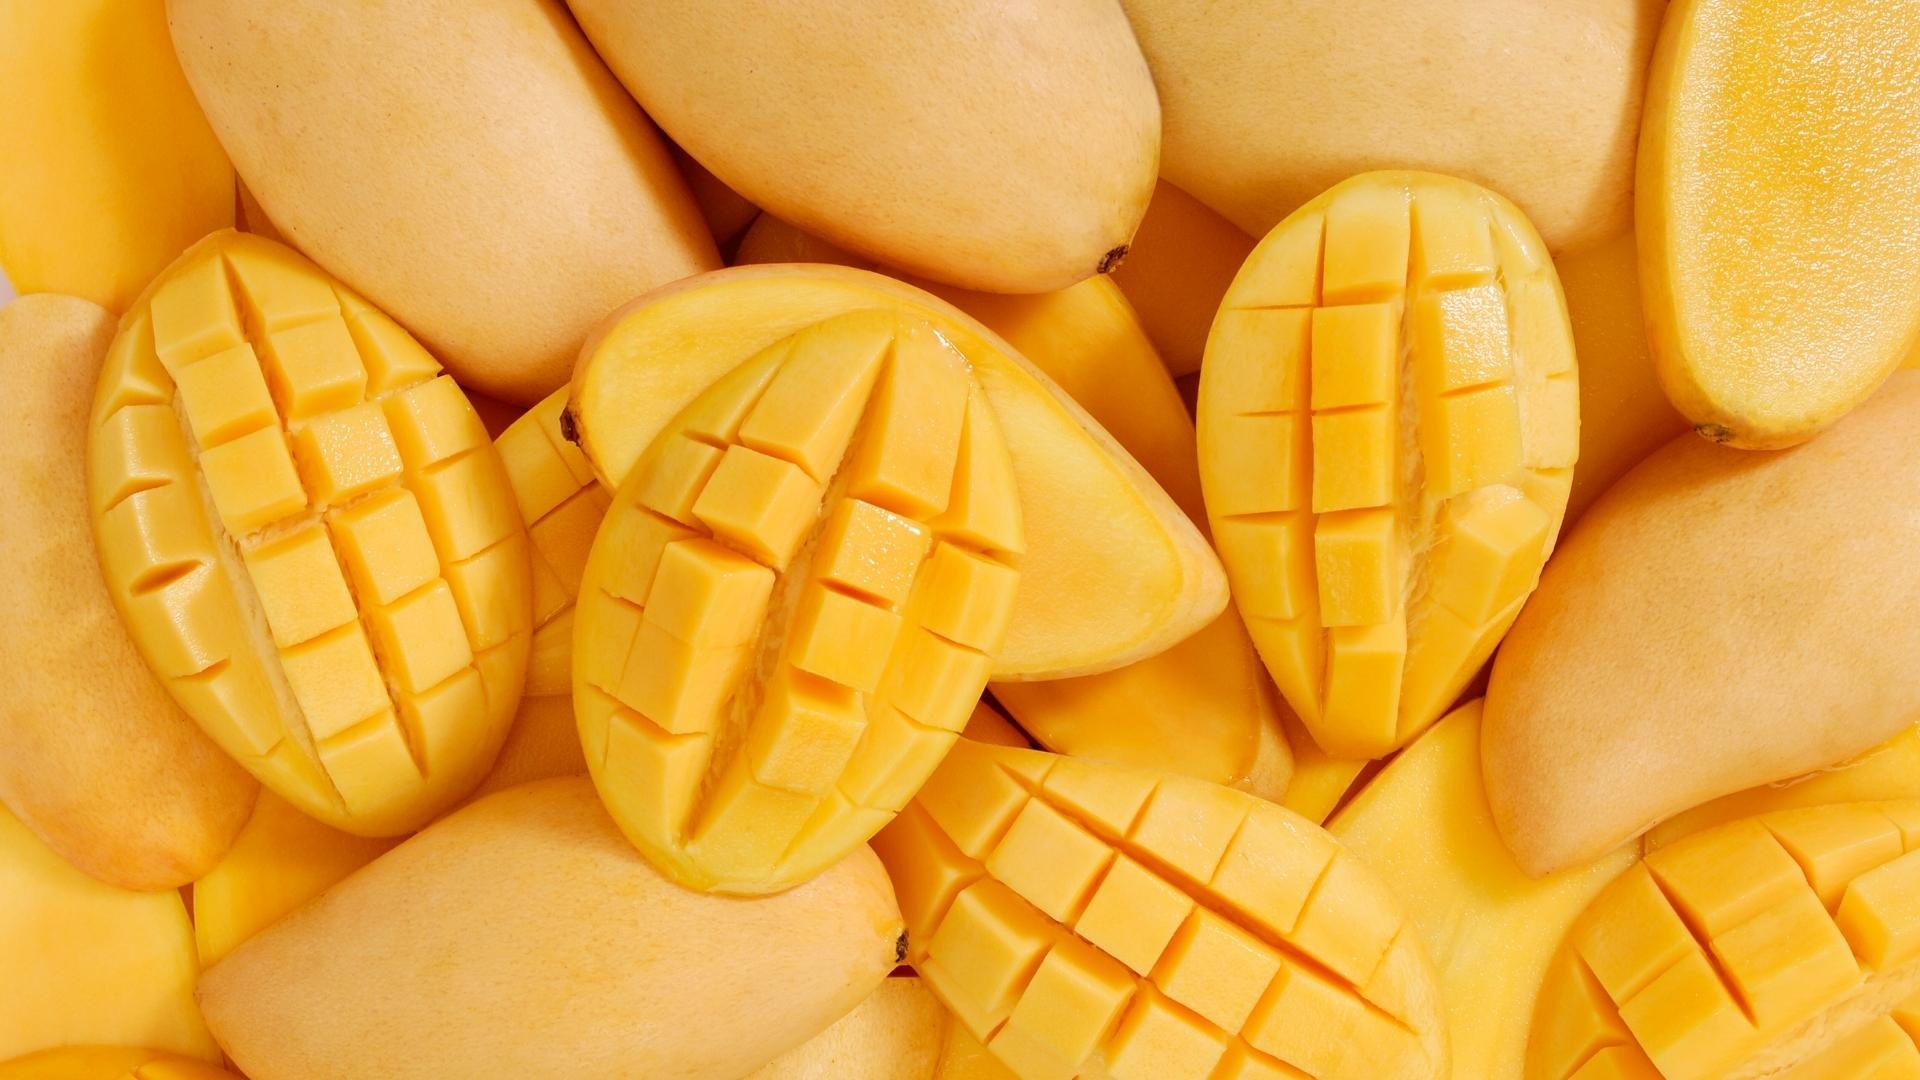 Mango: Rich in beta-carotene, a pigment responsible for the yellow-orange color of the fruit. 1920x1080 Full HD Background.